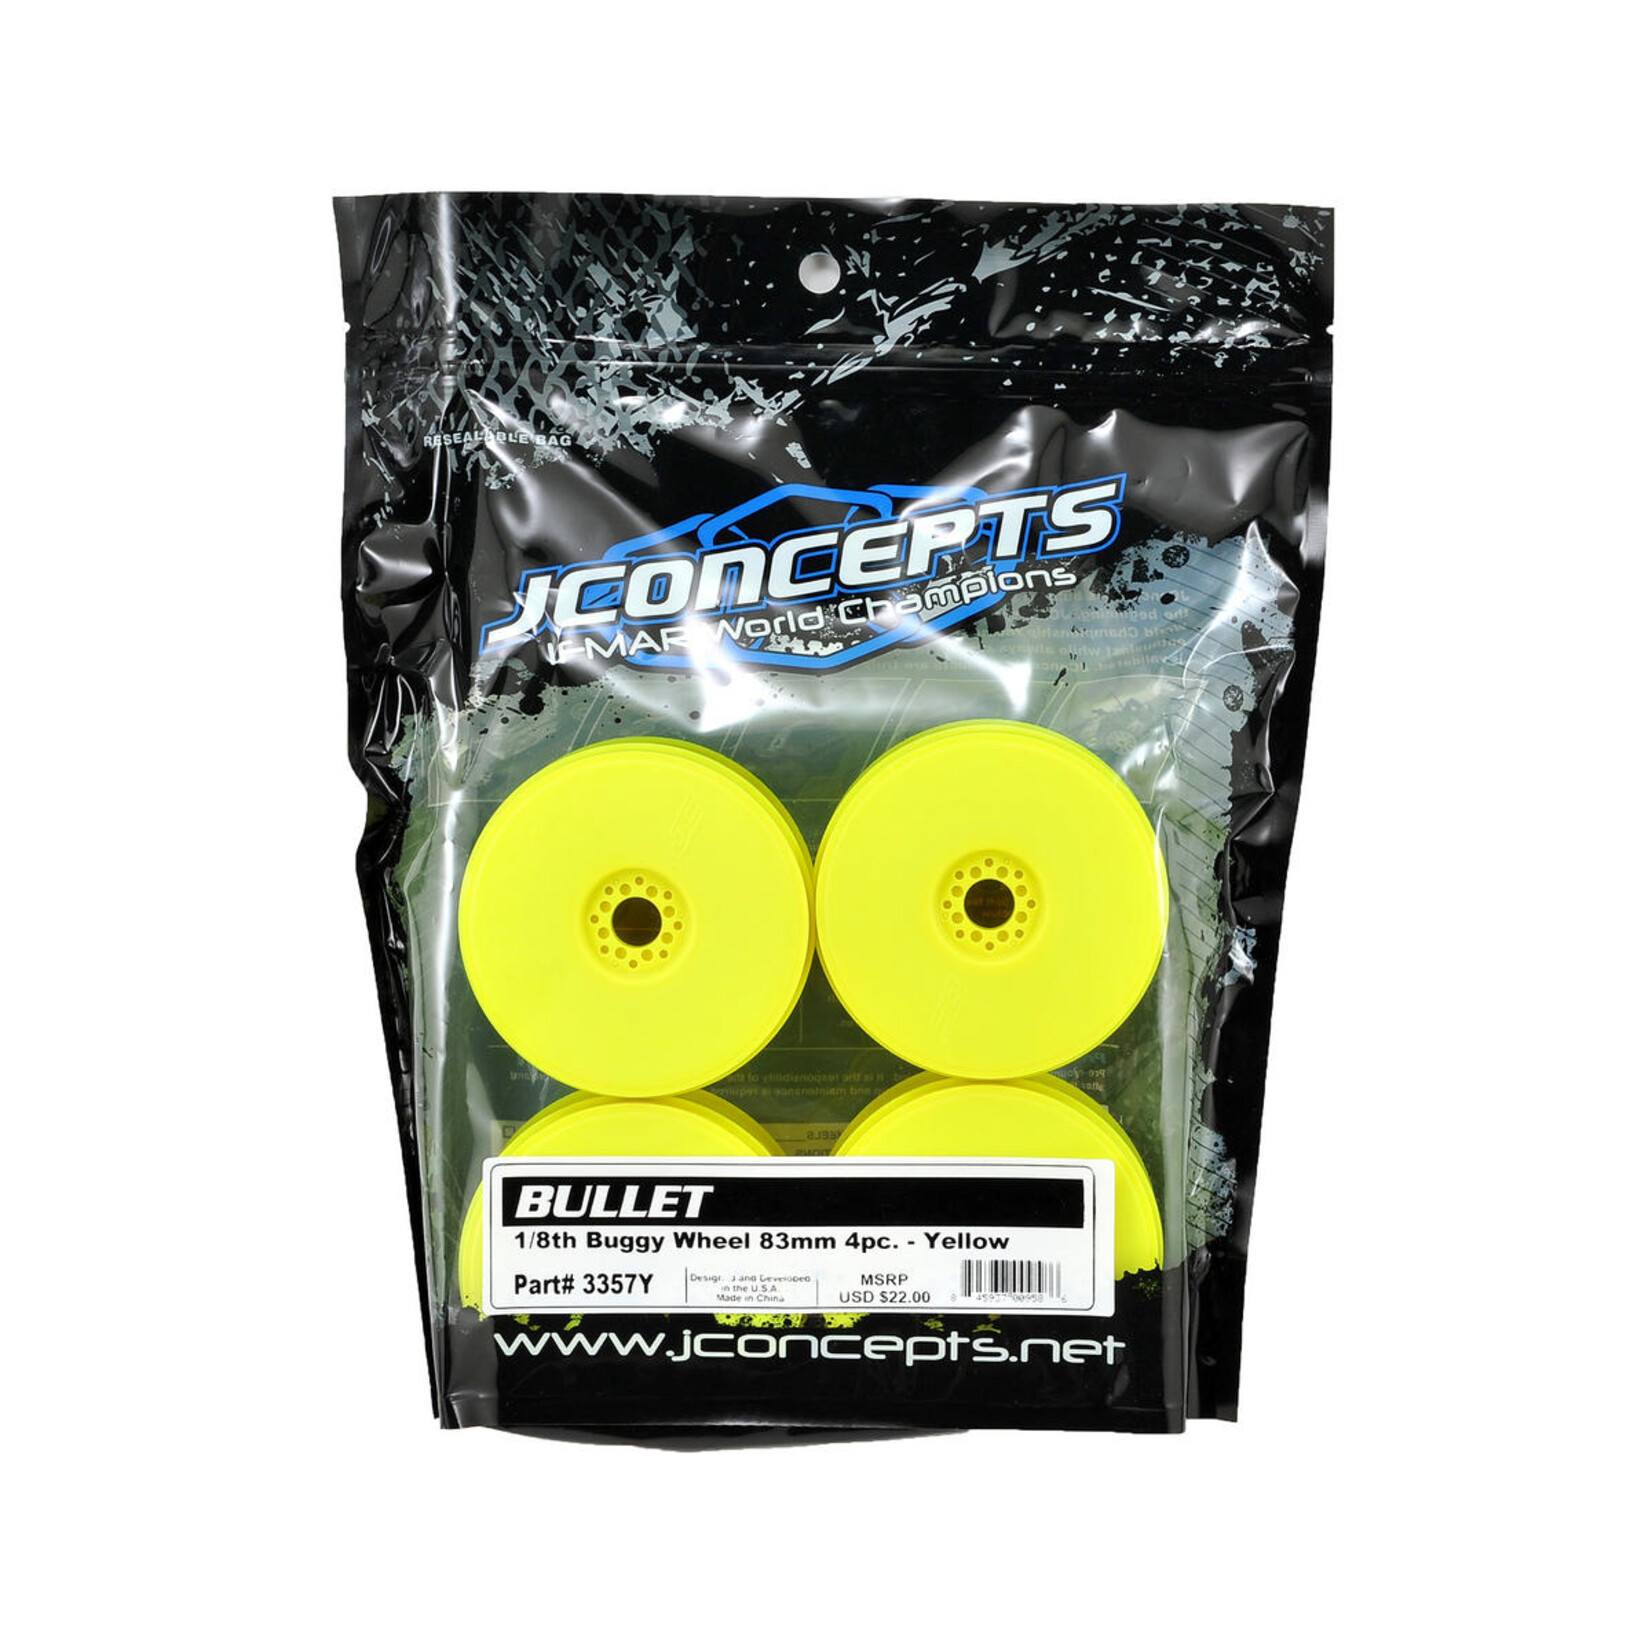 JConcepts JConcepts 83mm Bullet 1/8th Buggy Wheel (4) (Yellow) #3357Y